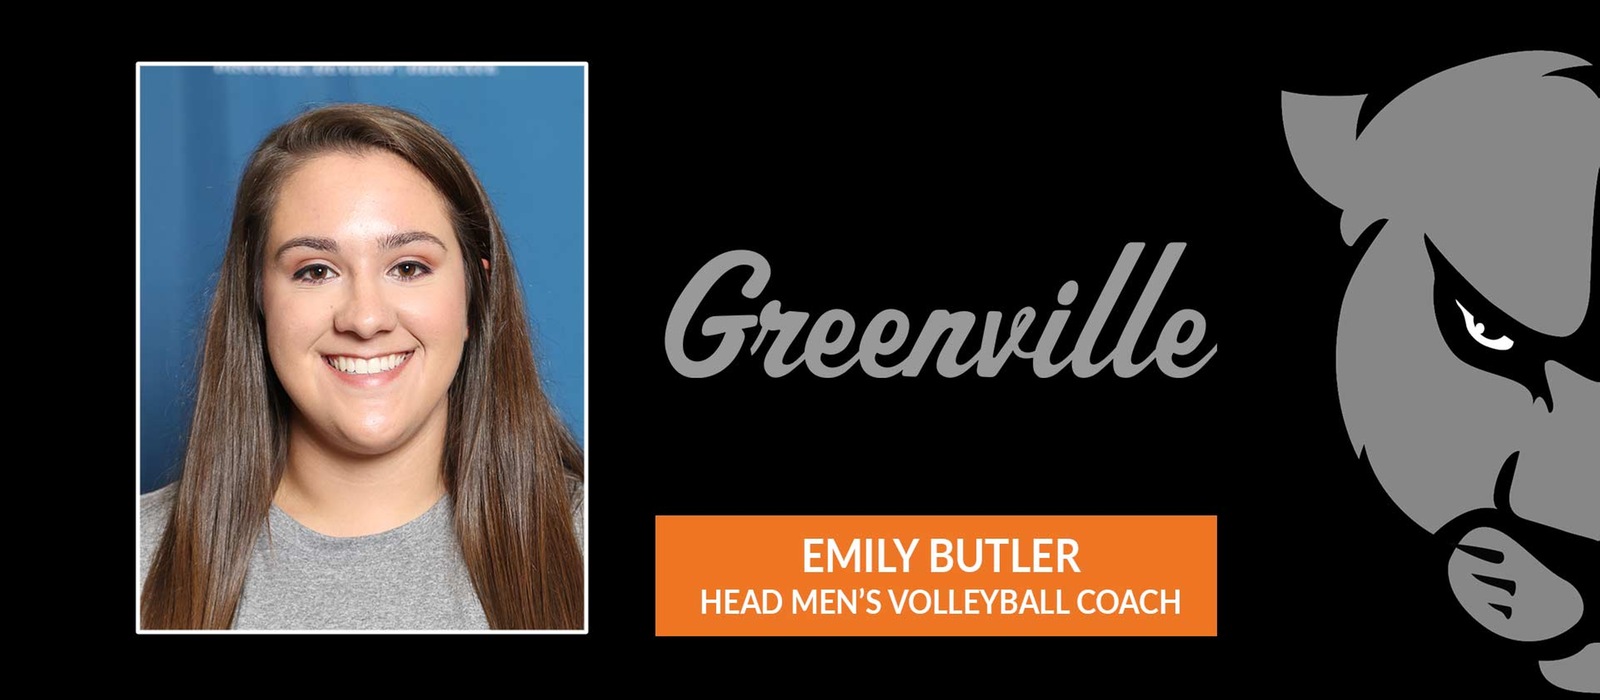 Emily Thebeau Butler returns to Greenville as head men's volleyball coach